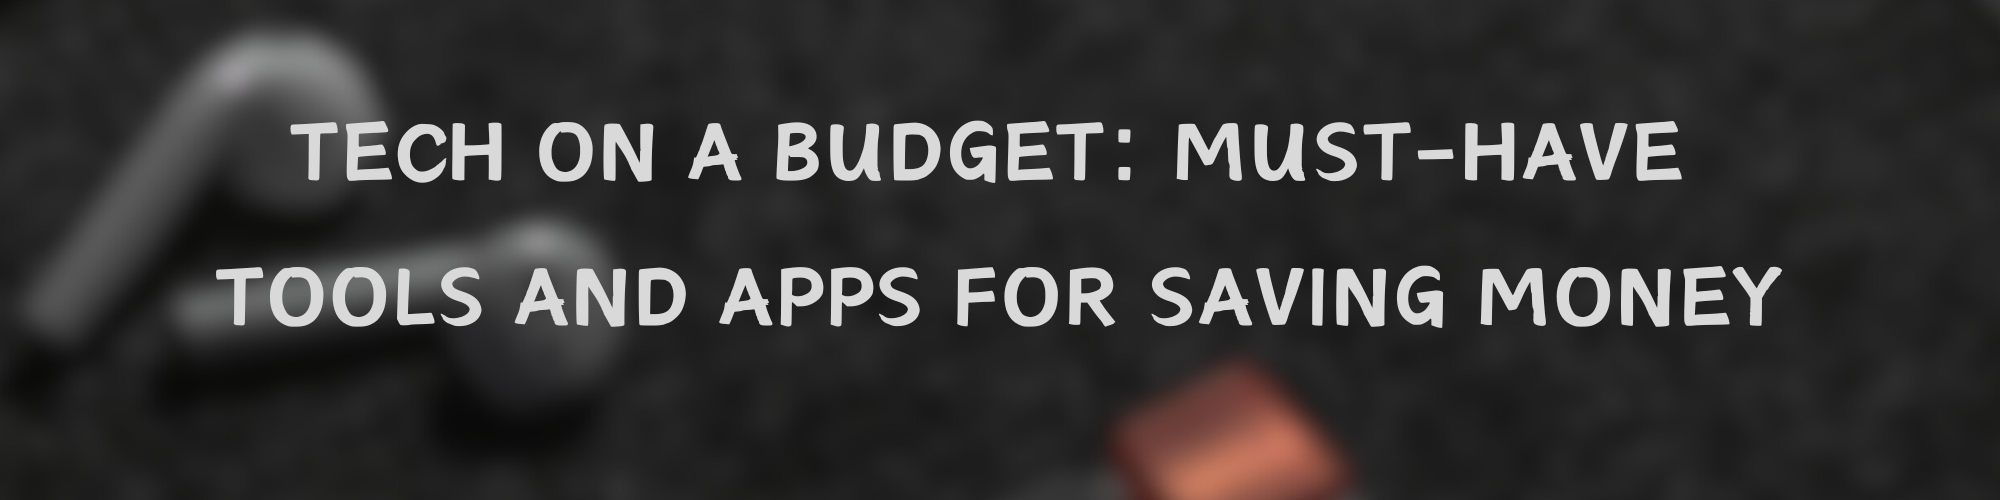 Tech on a Budget: Must-Have Tools and Apps for Saving Money